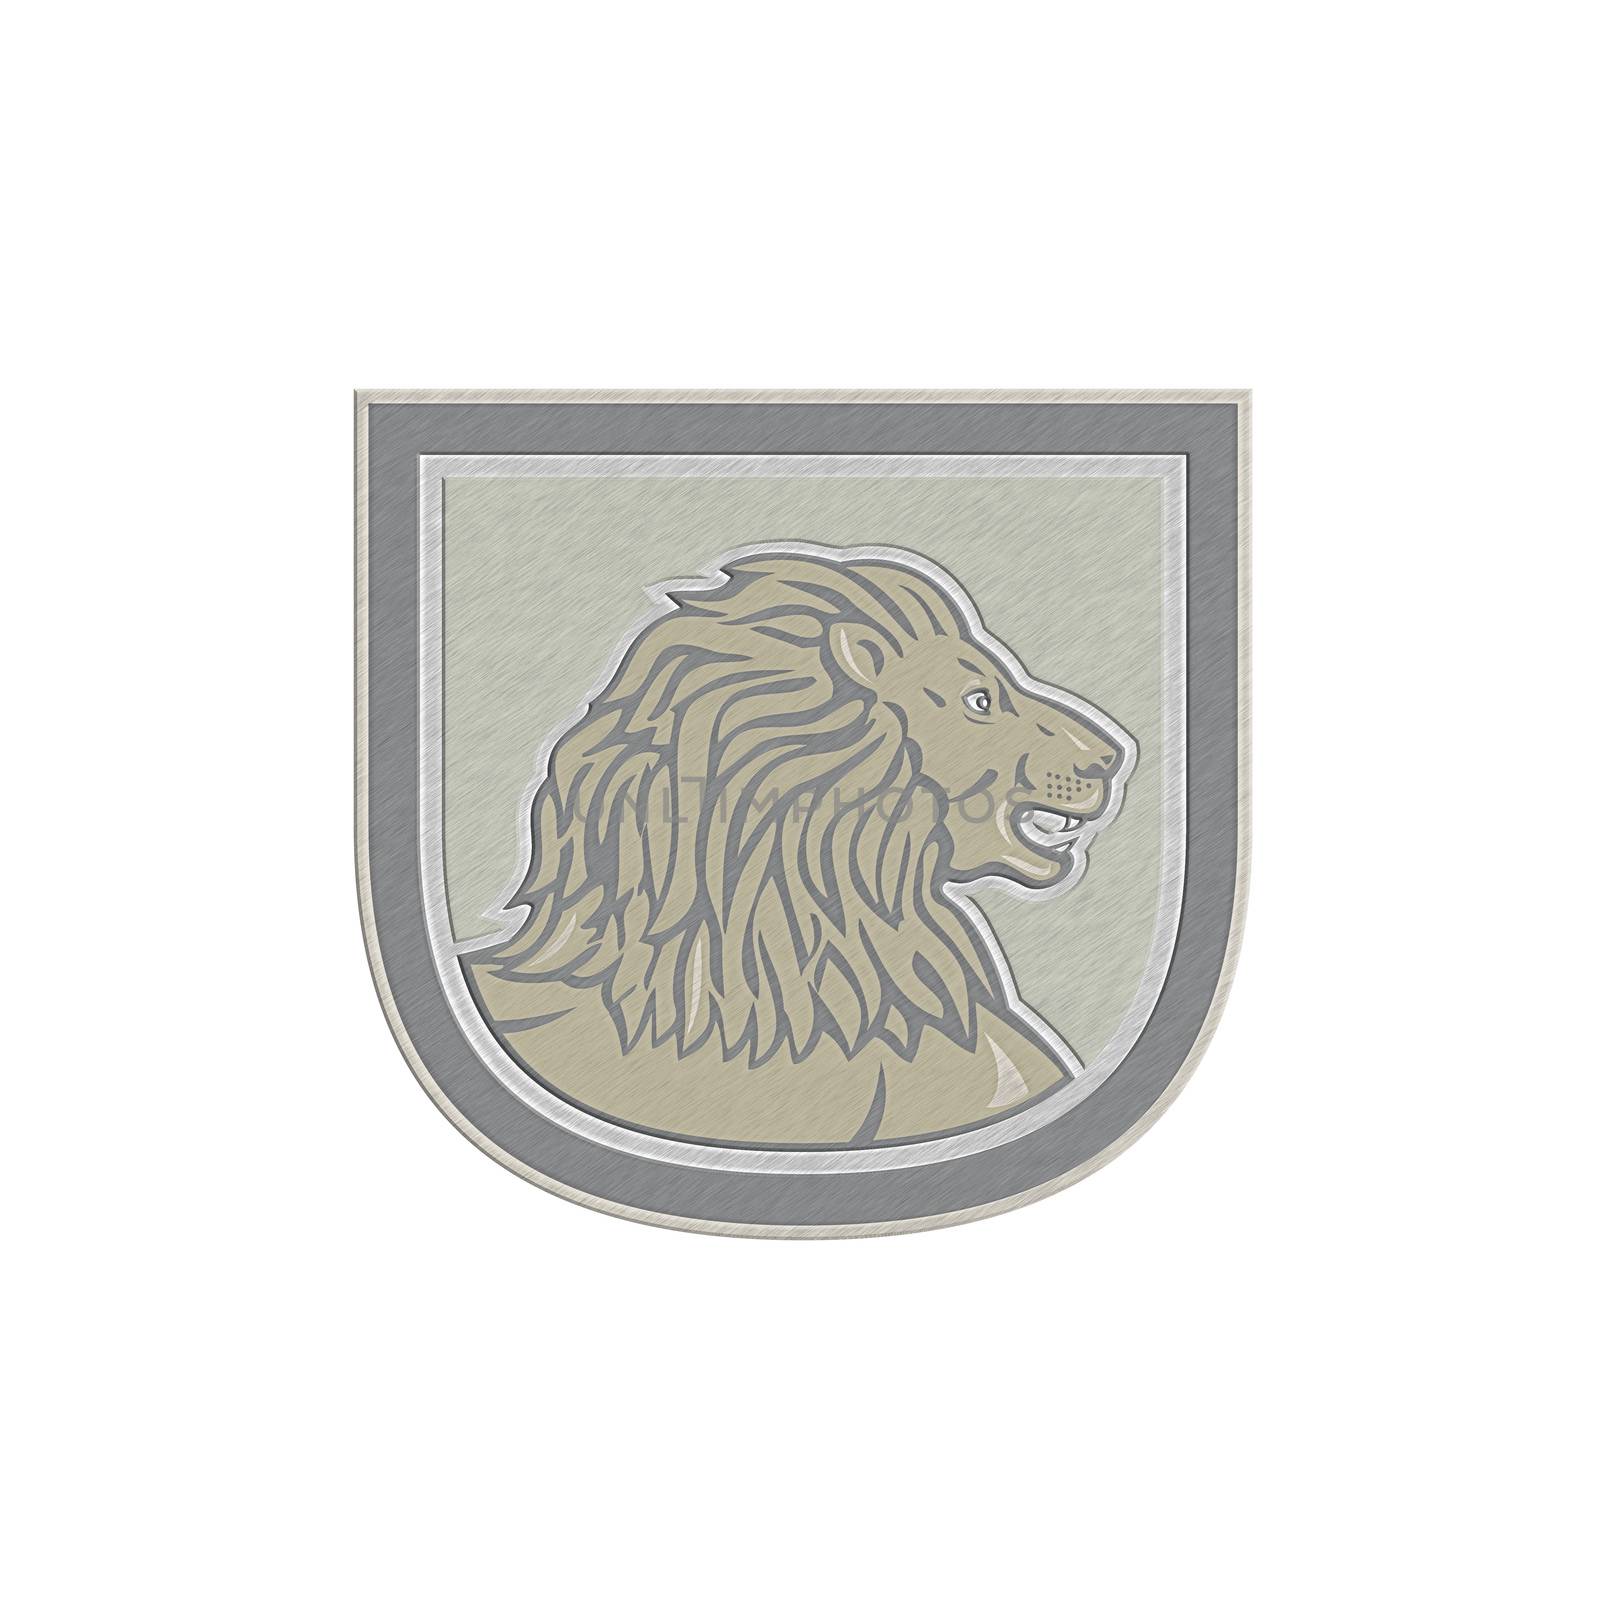 Metallic styled illustration of an lion big cat head viewed from side set inside shield crest on isolated background done in retro style. 